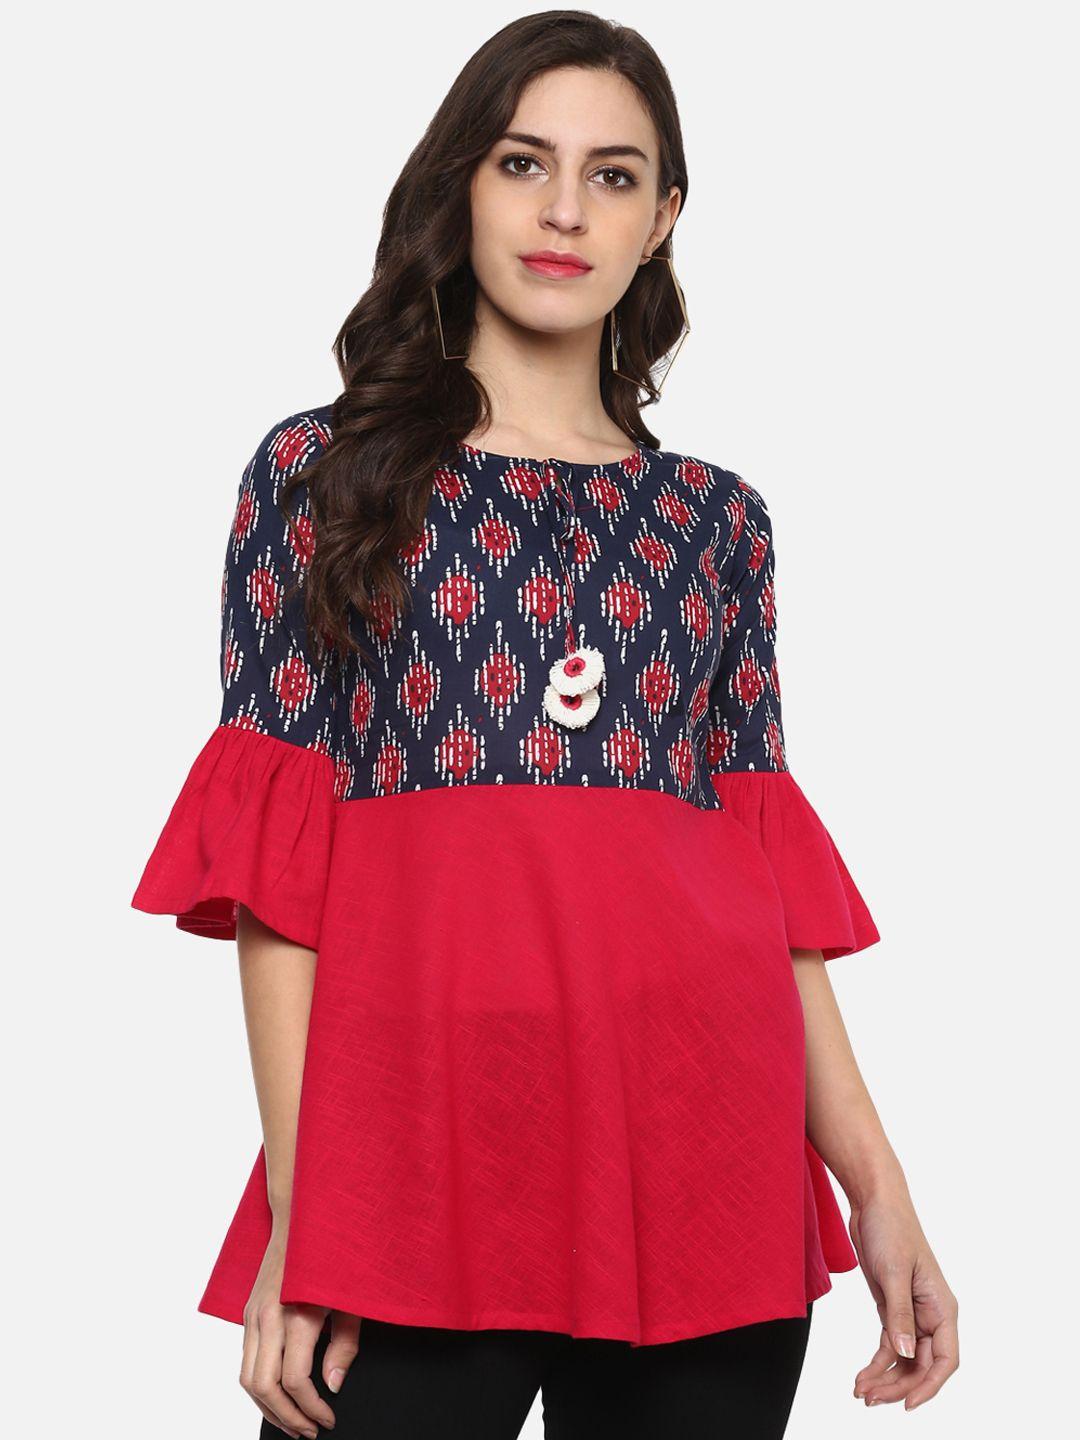 yash gallery women red printed a-line top